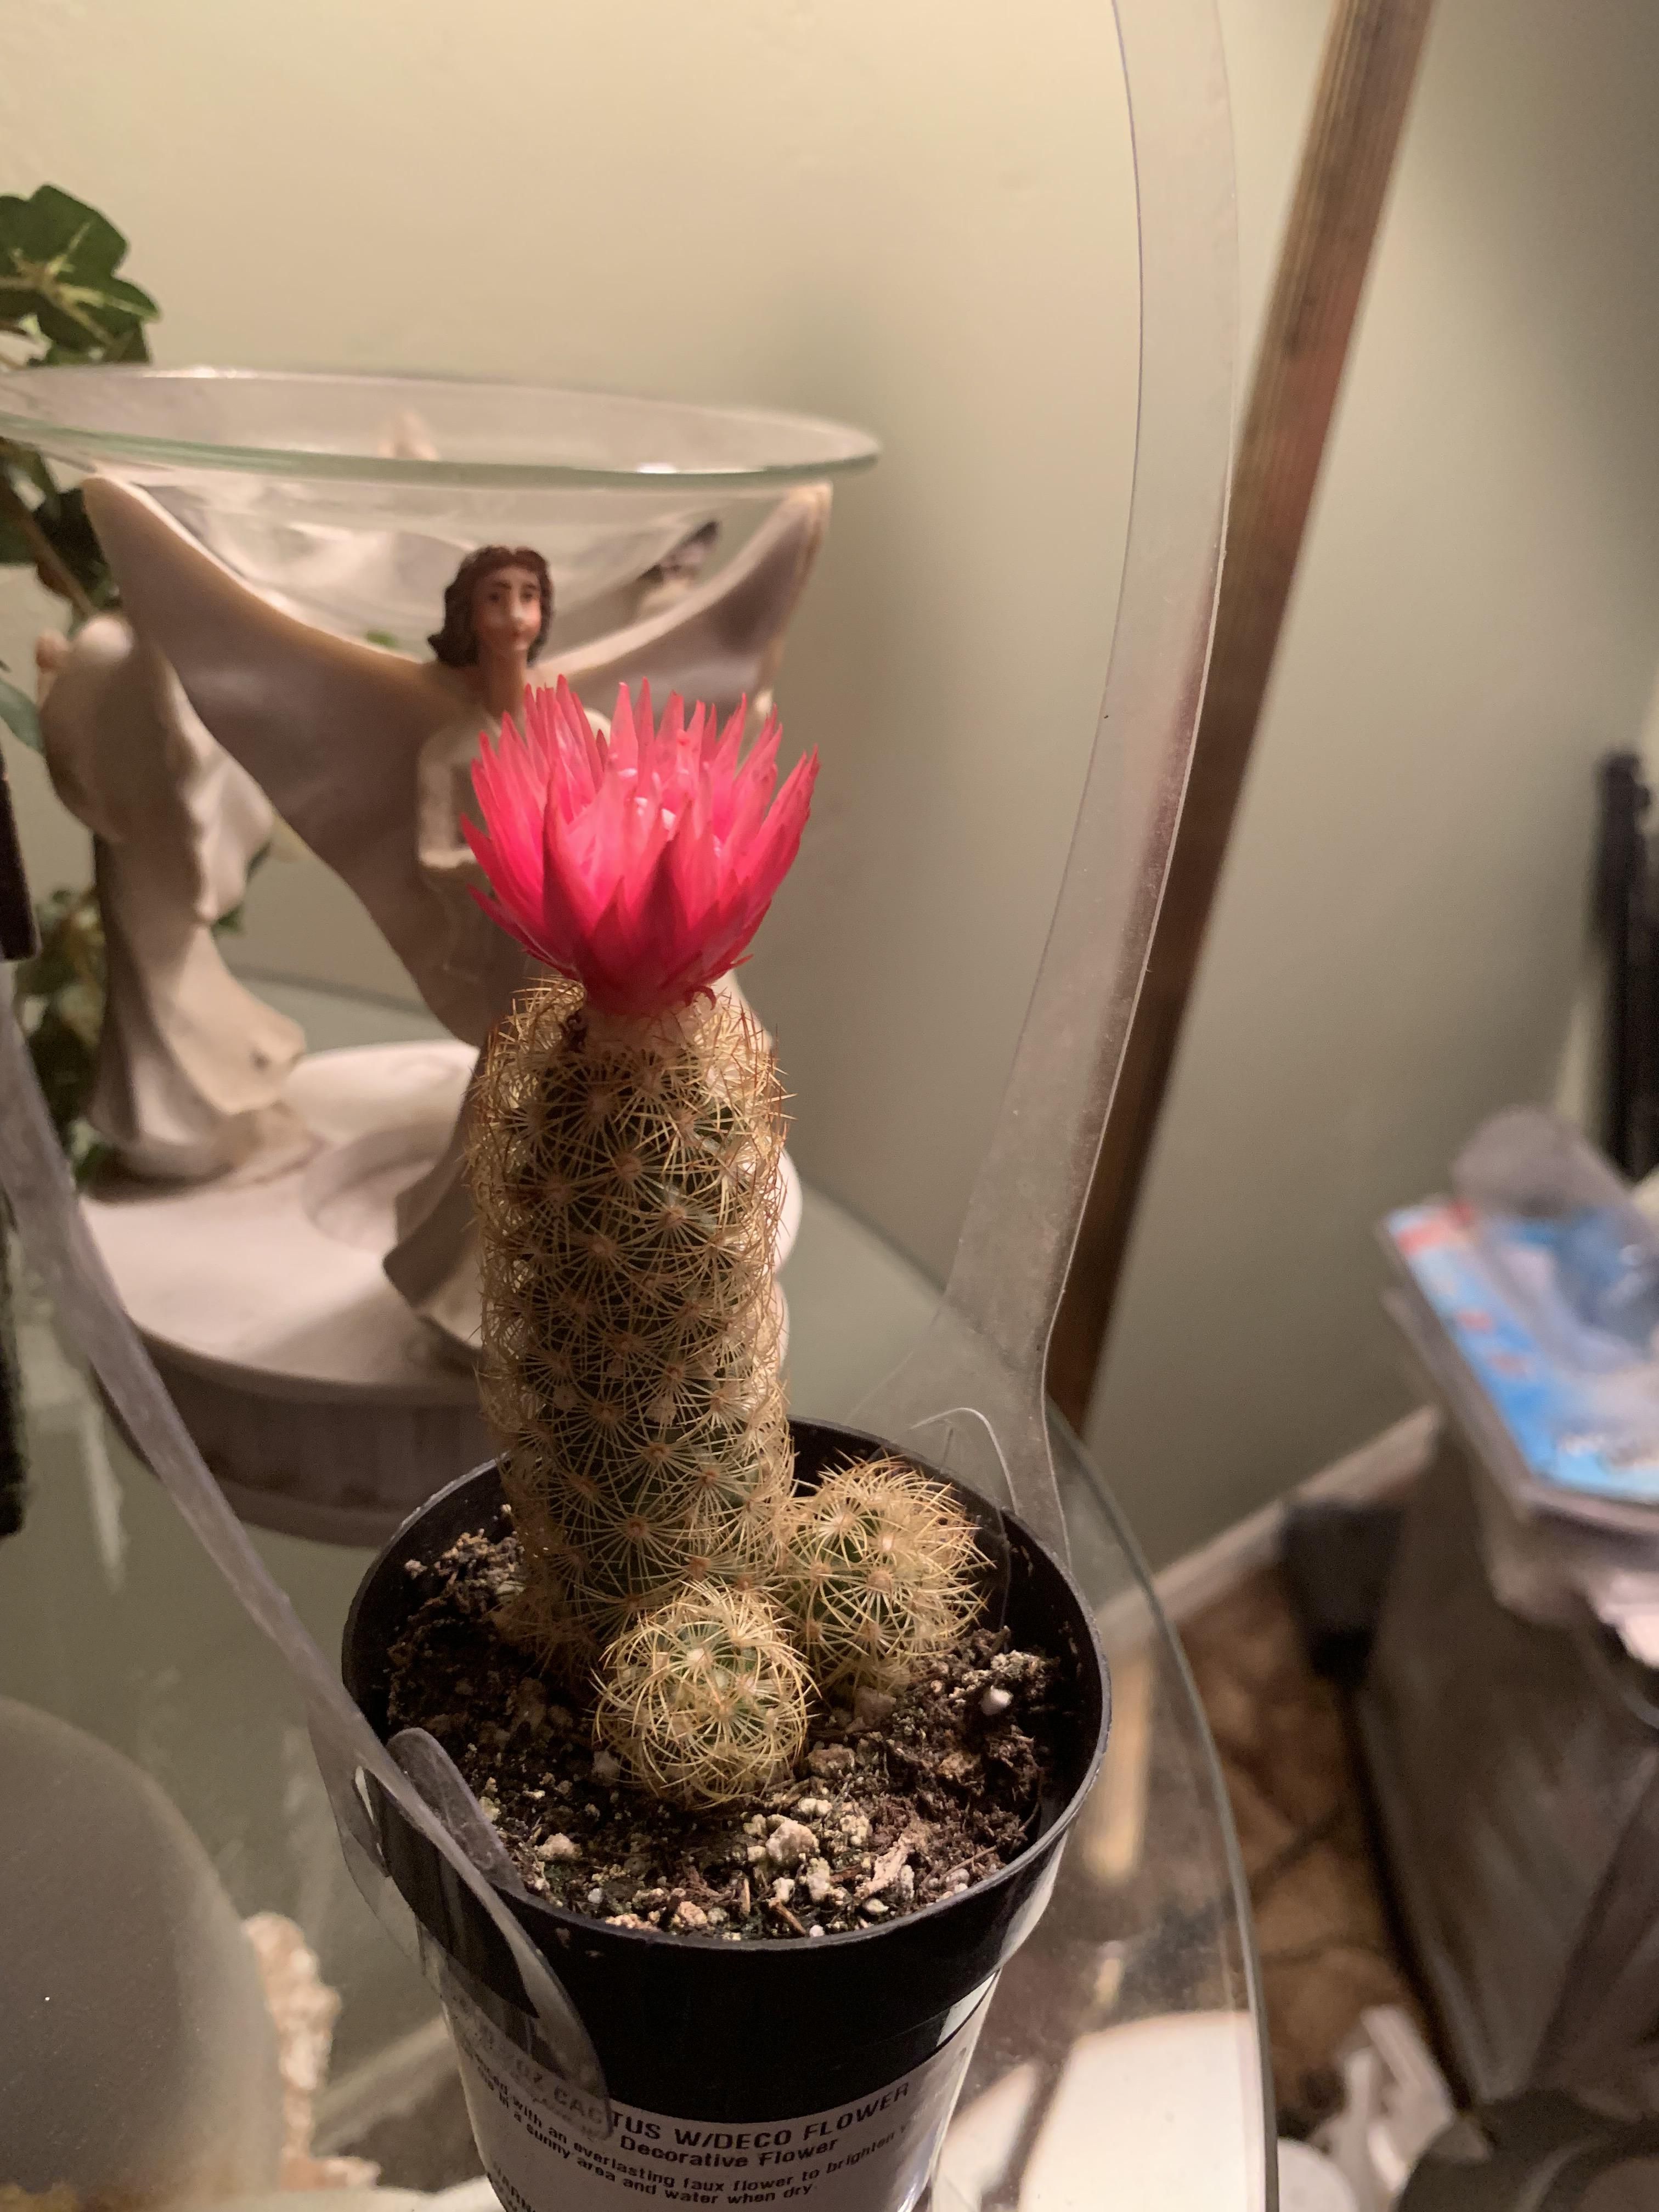 My grandma collects cacti, she says this one will only grow 6 inches.